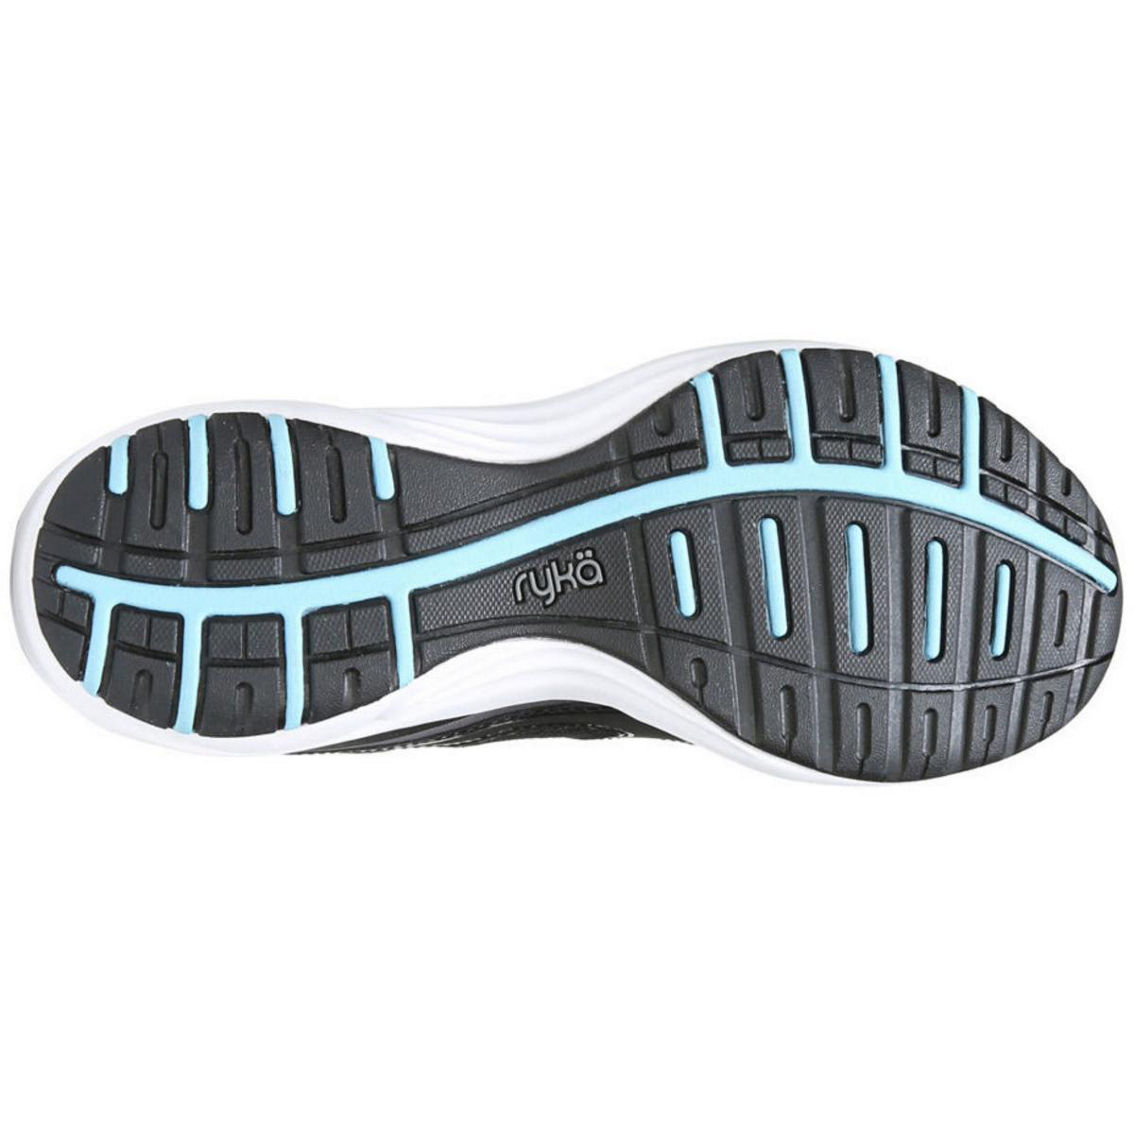 Dash 3 Womens Comfort Insole Athletic and Training Shoes - Image 2 of 5